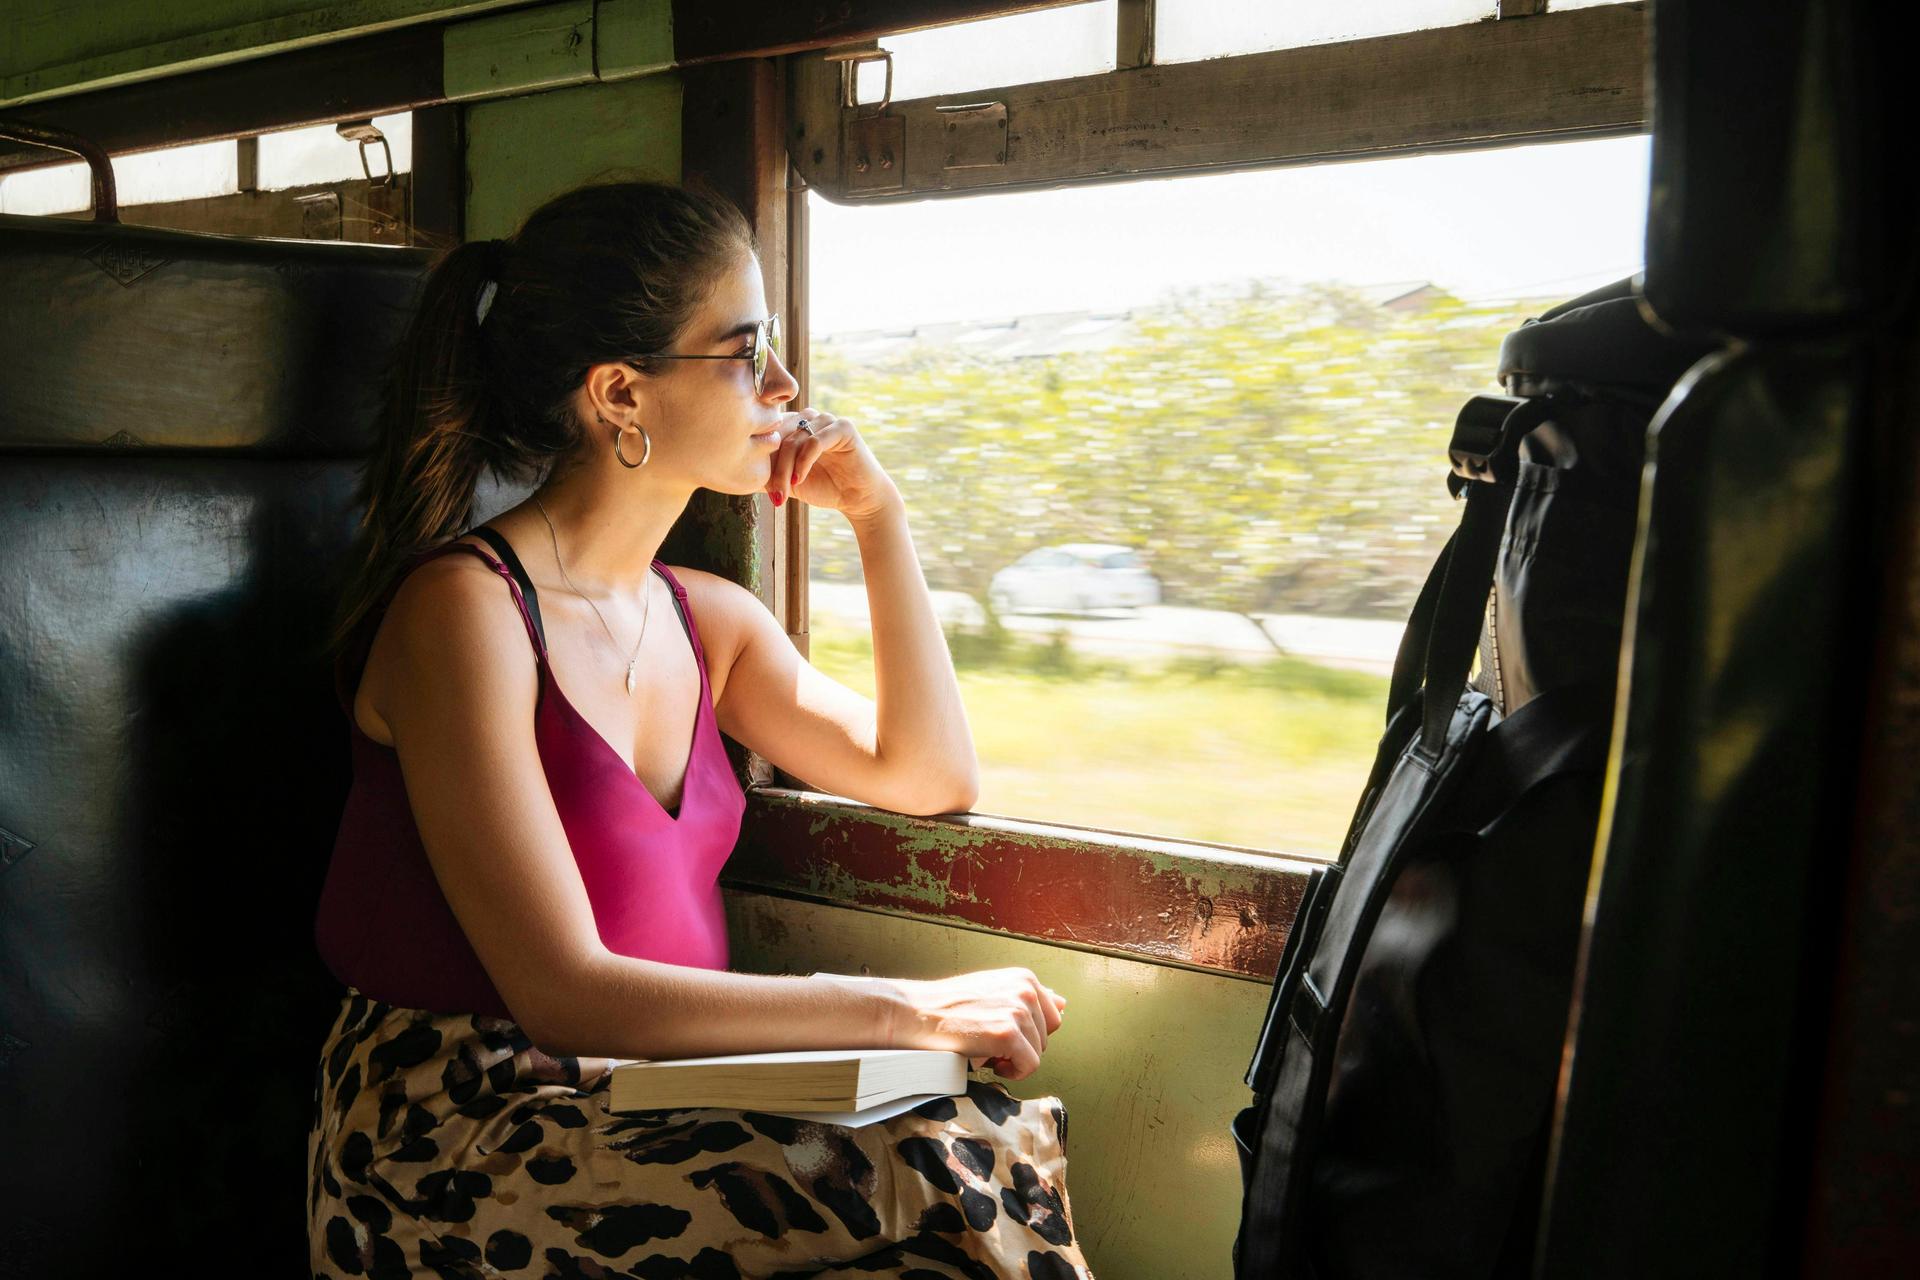 A girl wearing sunglasses sits in a window seat on a Sri Lankan train from Colombo to Galle. A book rests on her lap as she stares out of the open window, where green countryside is visible.